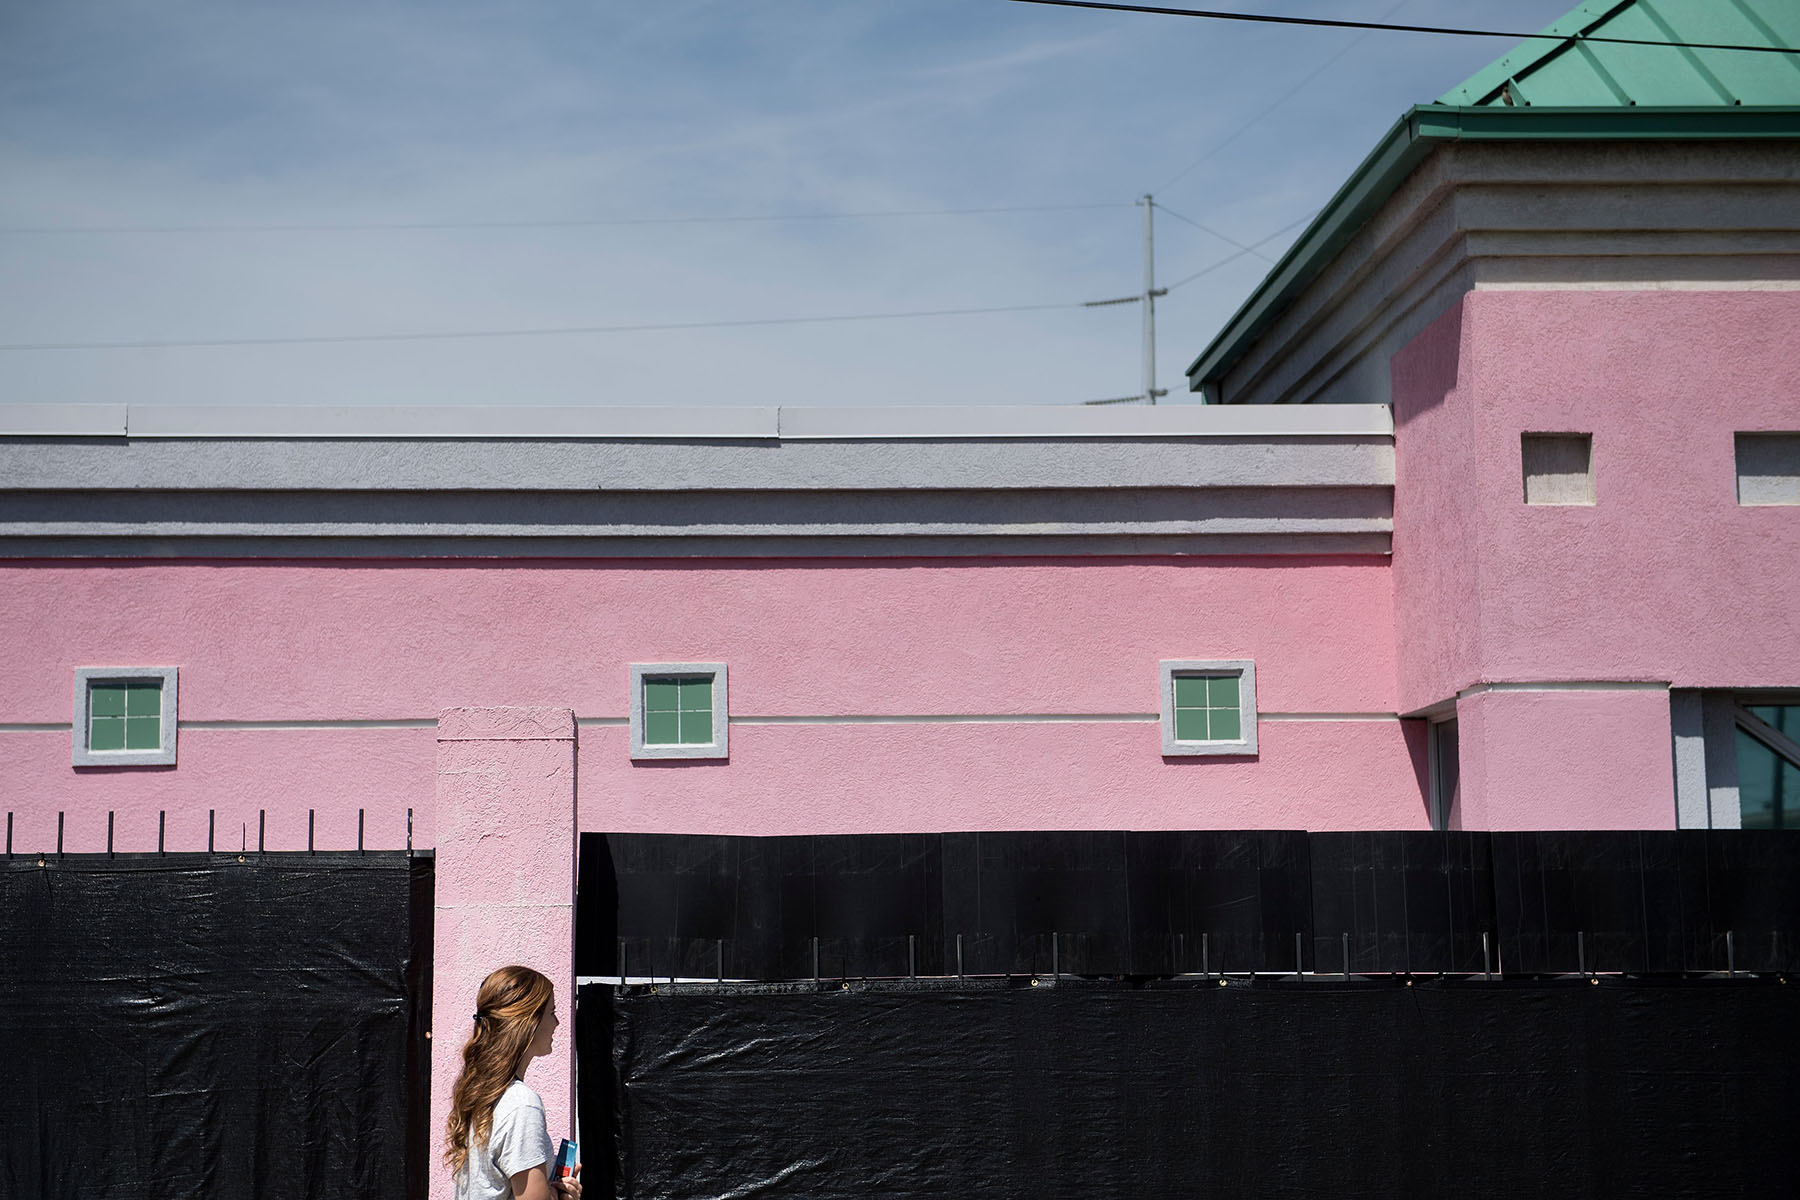 An anti-abortion rights activist stands in front of the last abortion clinic in Mississippi. She is holding pamphlets.